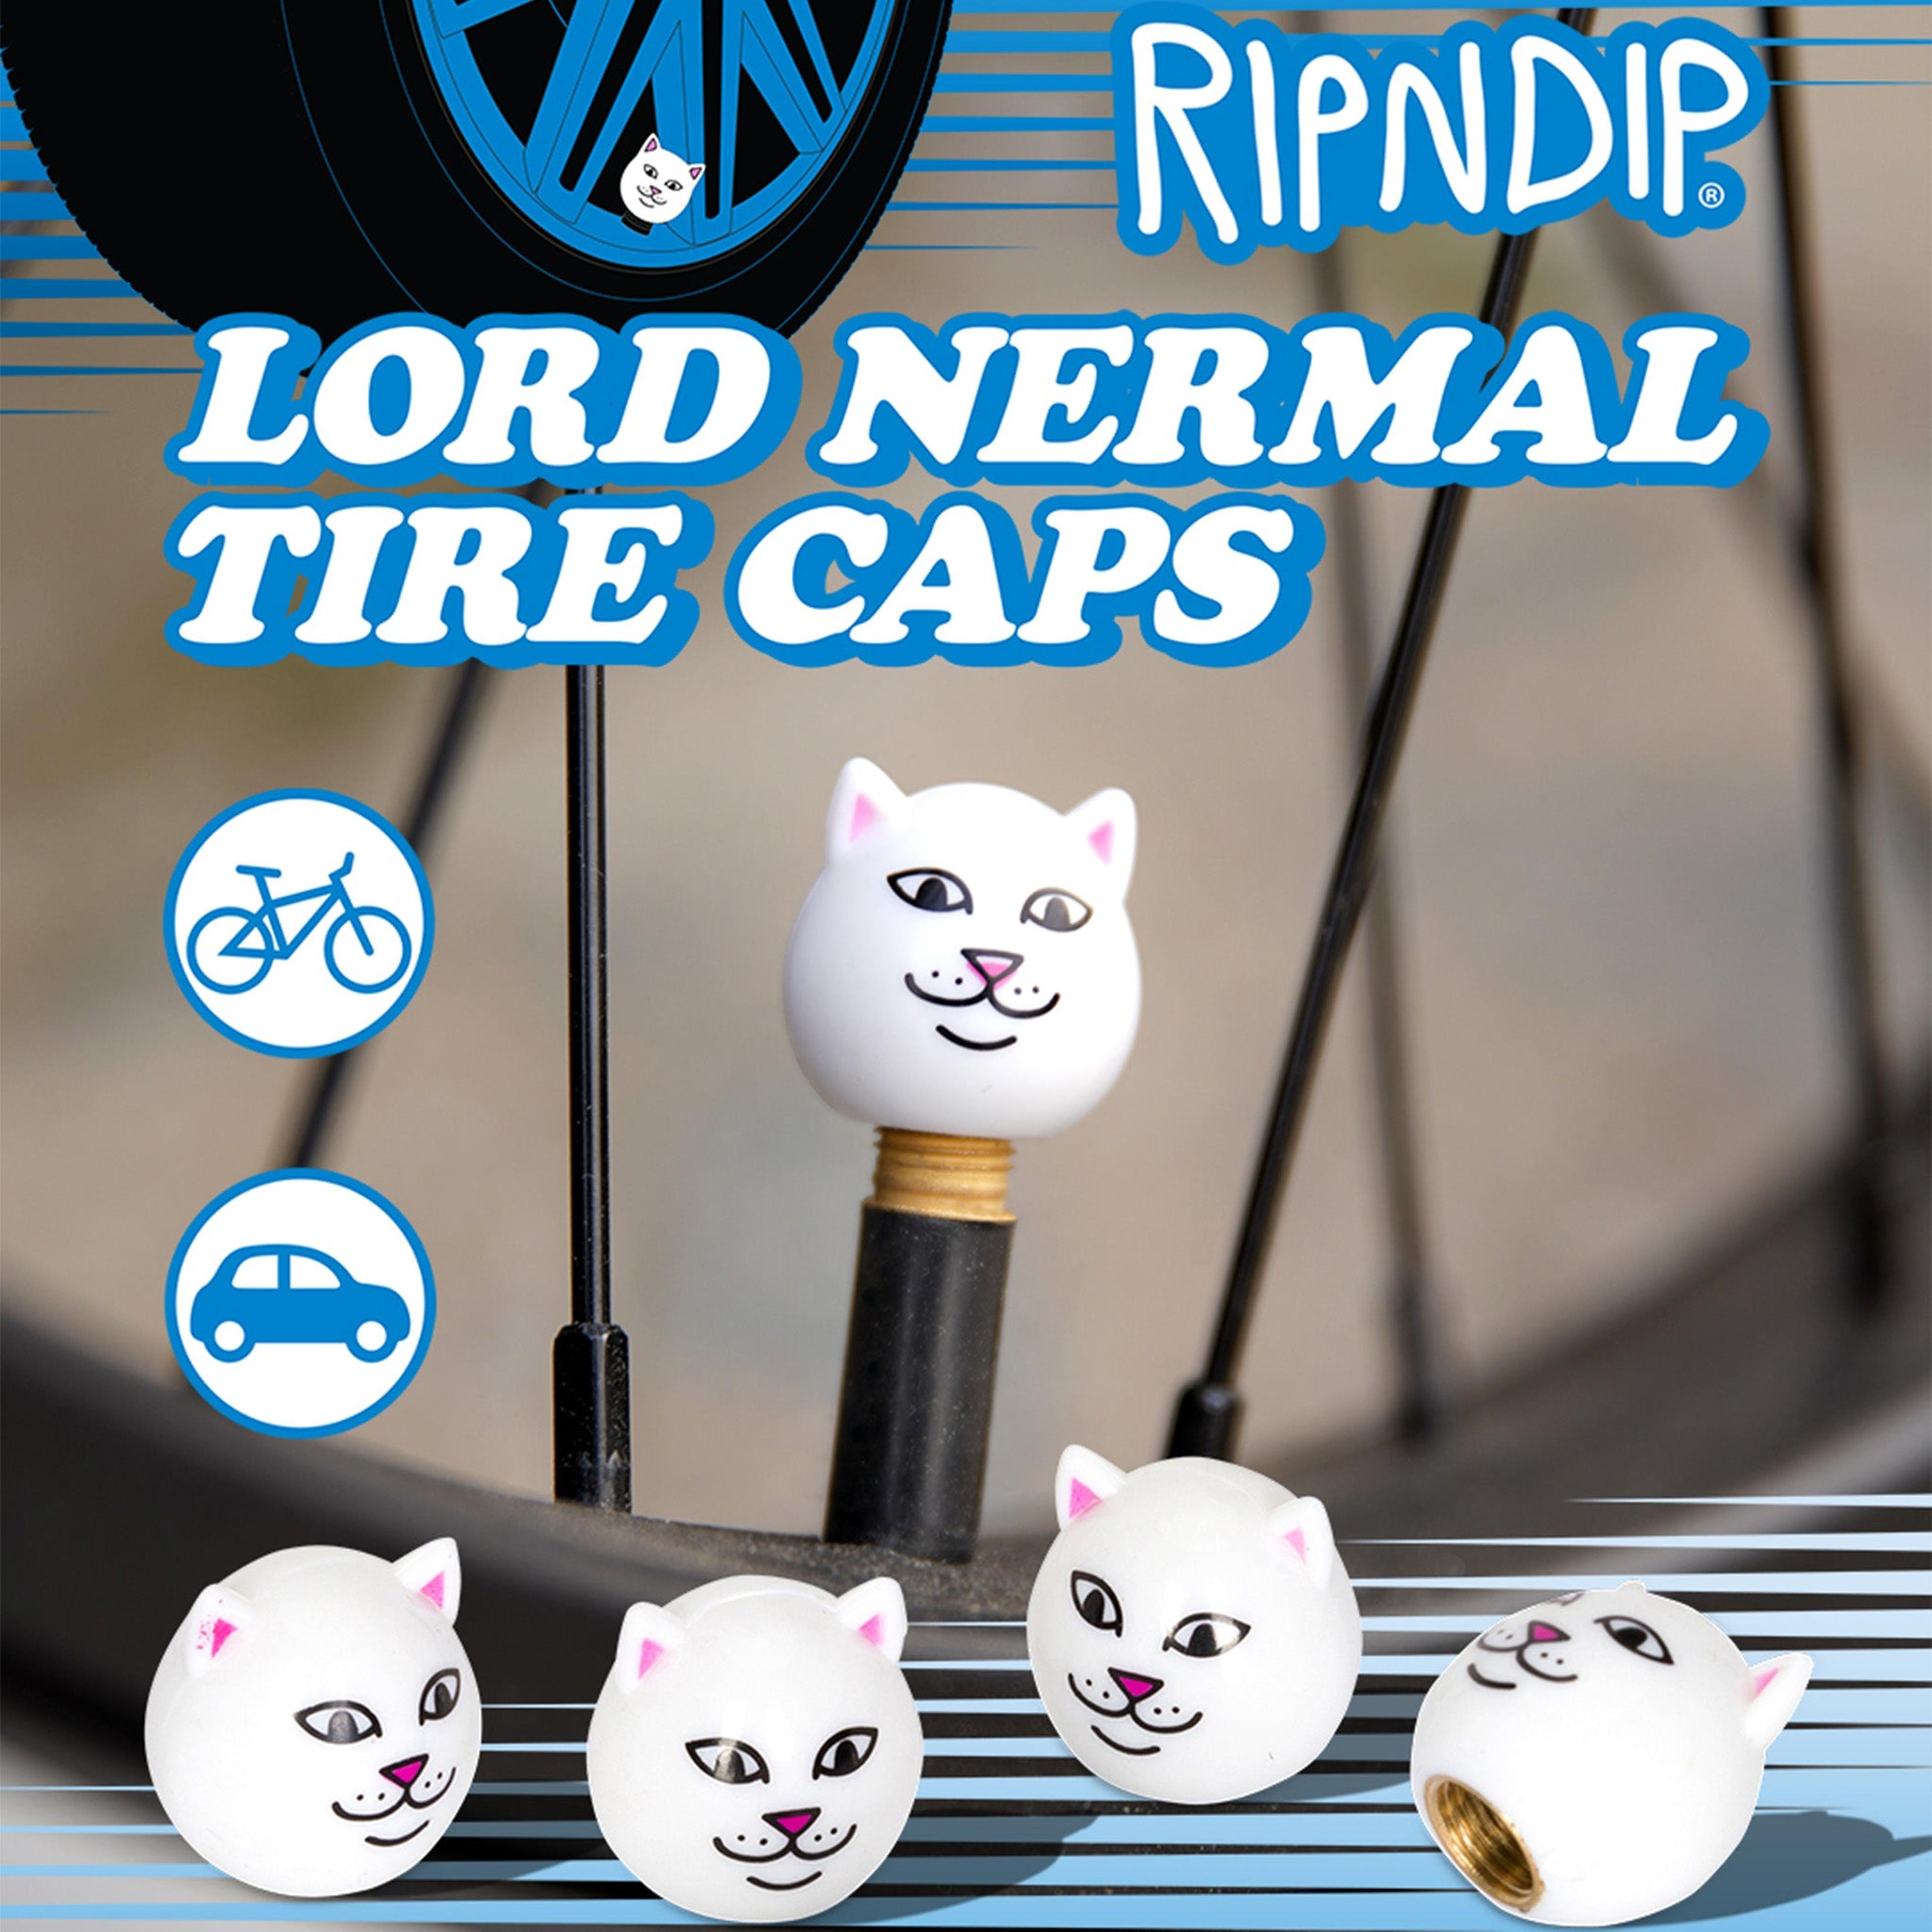 Alternate View 1 of Lord Nermal Tire Caps (White)